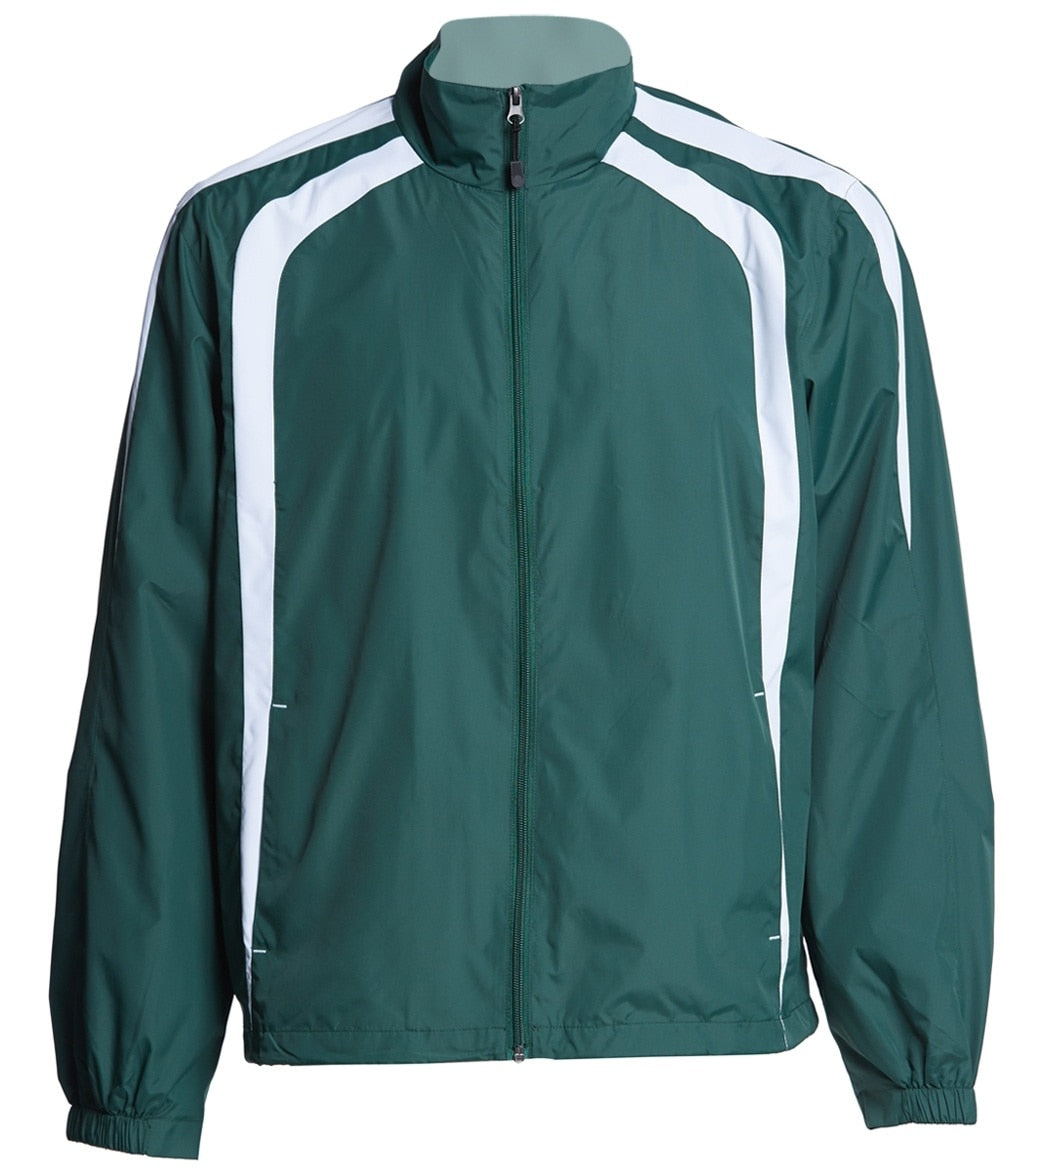 Men's Warm Up Jacket - Forest Green/White Large Polyester - Swimoutlet.com